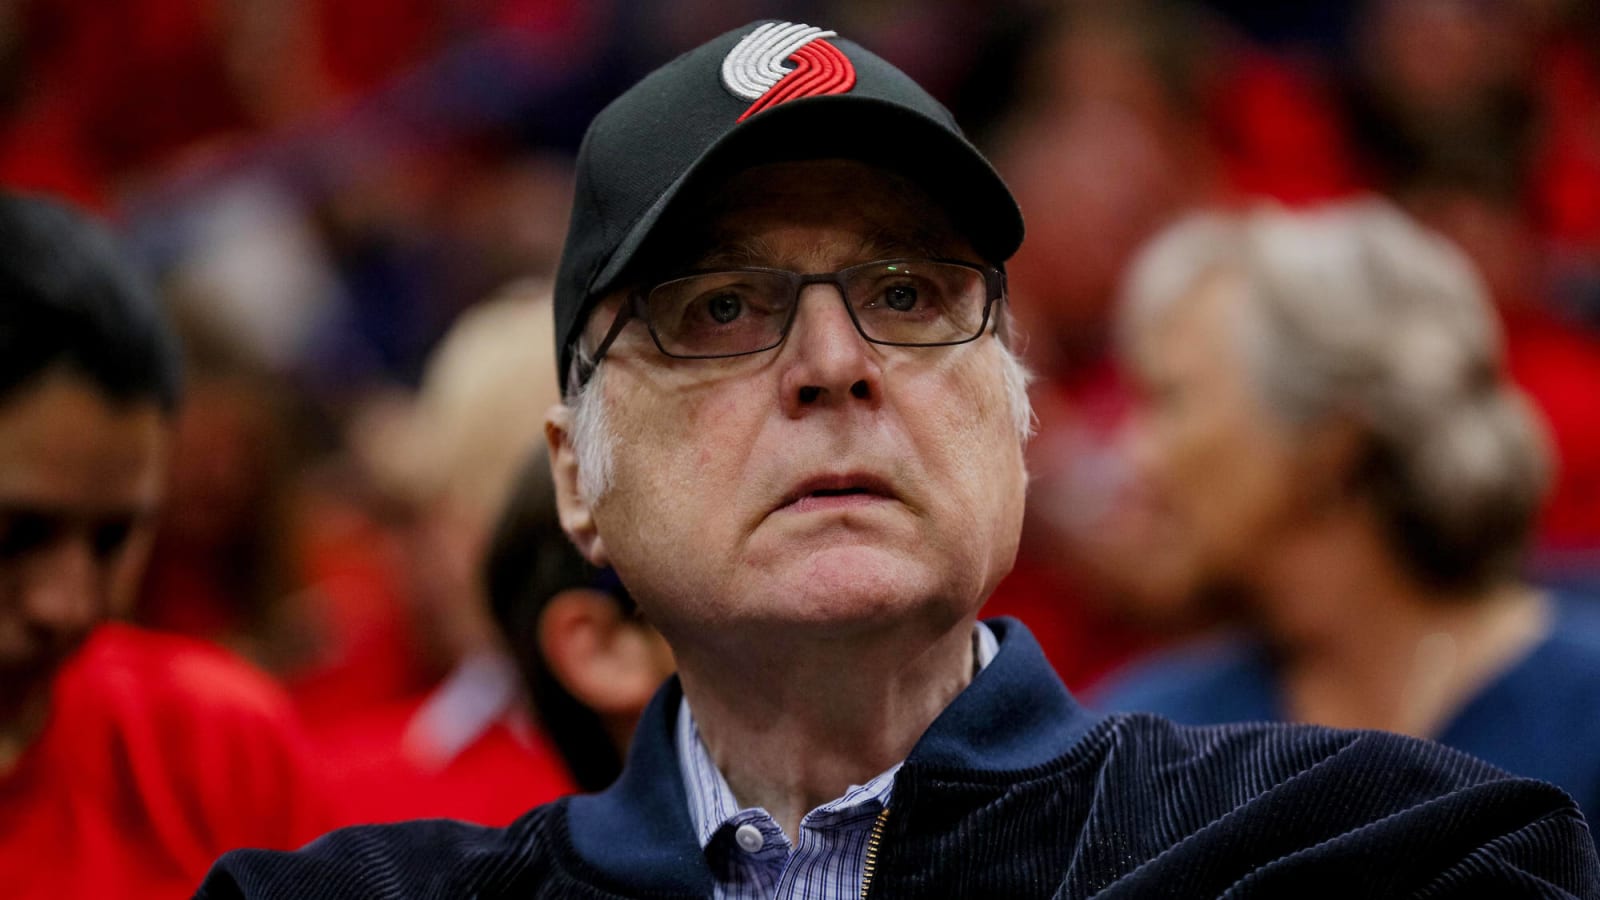 Breaking down the 10 richest NBA owners